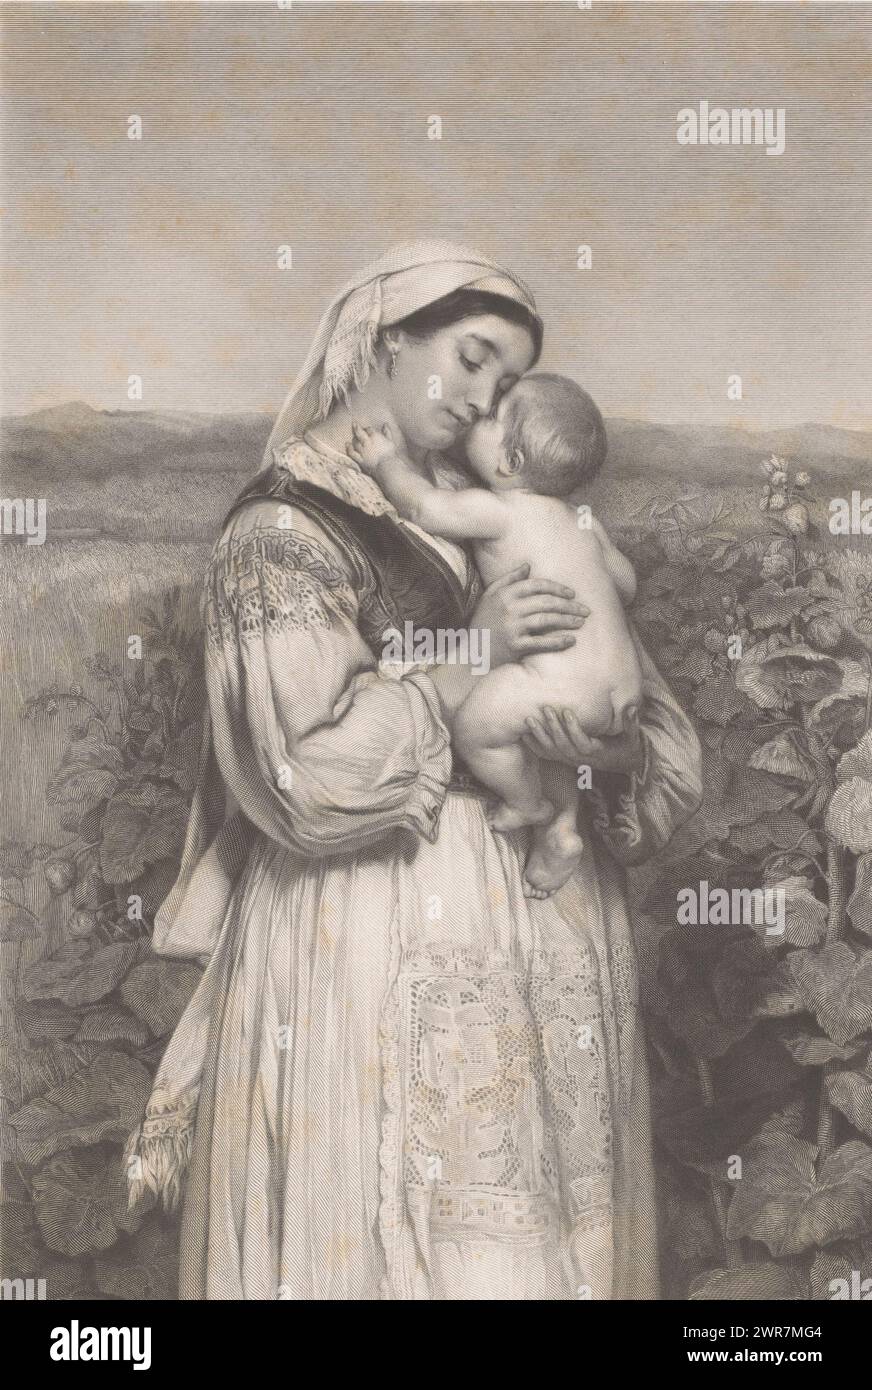 Mother with baby in a garden, print maker: Joseph Bal, after painting by: Jaroslav Cermak, 1830 - 1867, paper, engraving, height 418 mm × width 297 mm, print Stock Photo